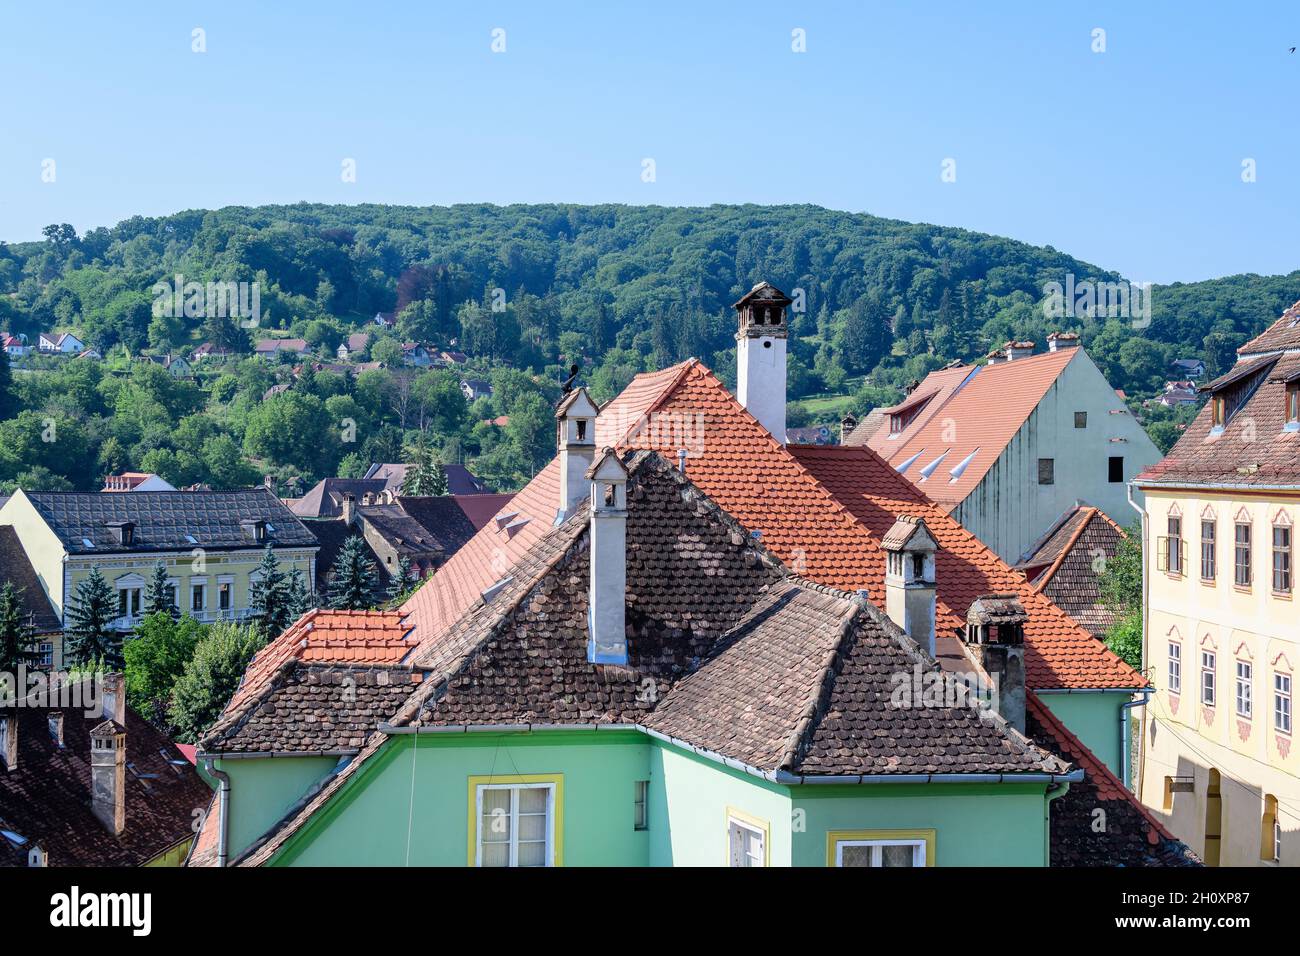 Landscape with view over houses of Sighisoara city, in Transylvania (Transilvania) region of Romania, in a sunny summer day Stock Photo